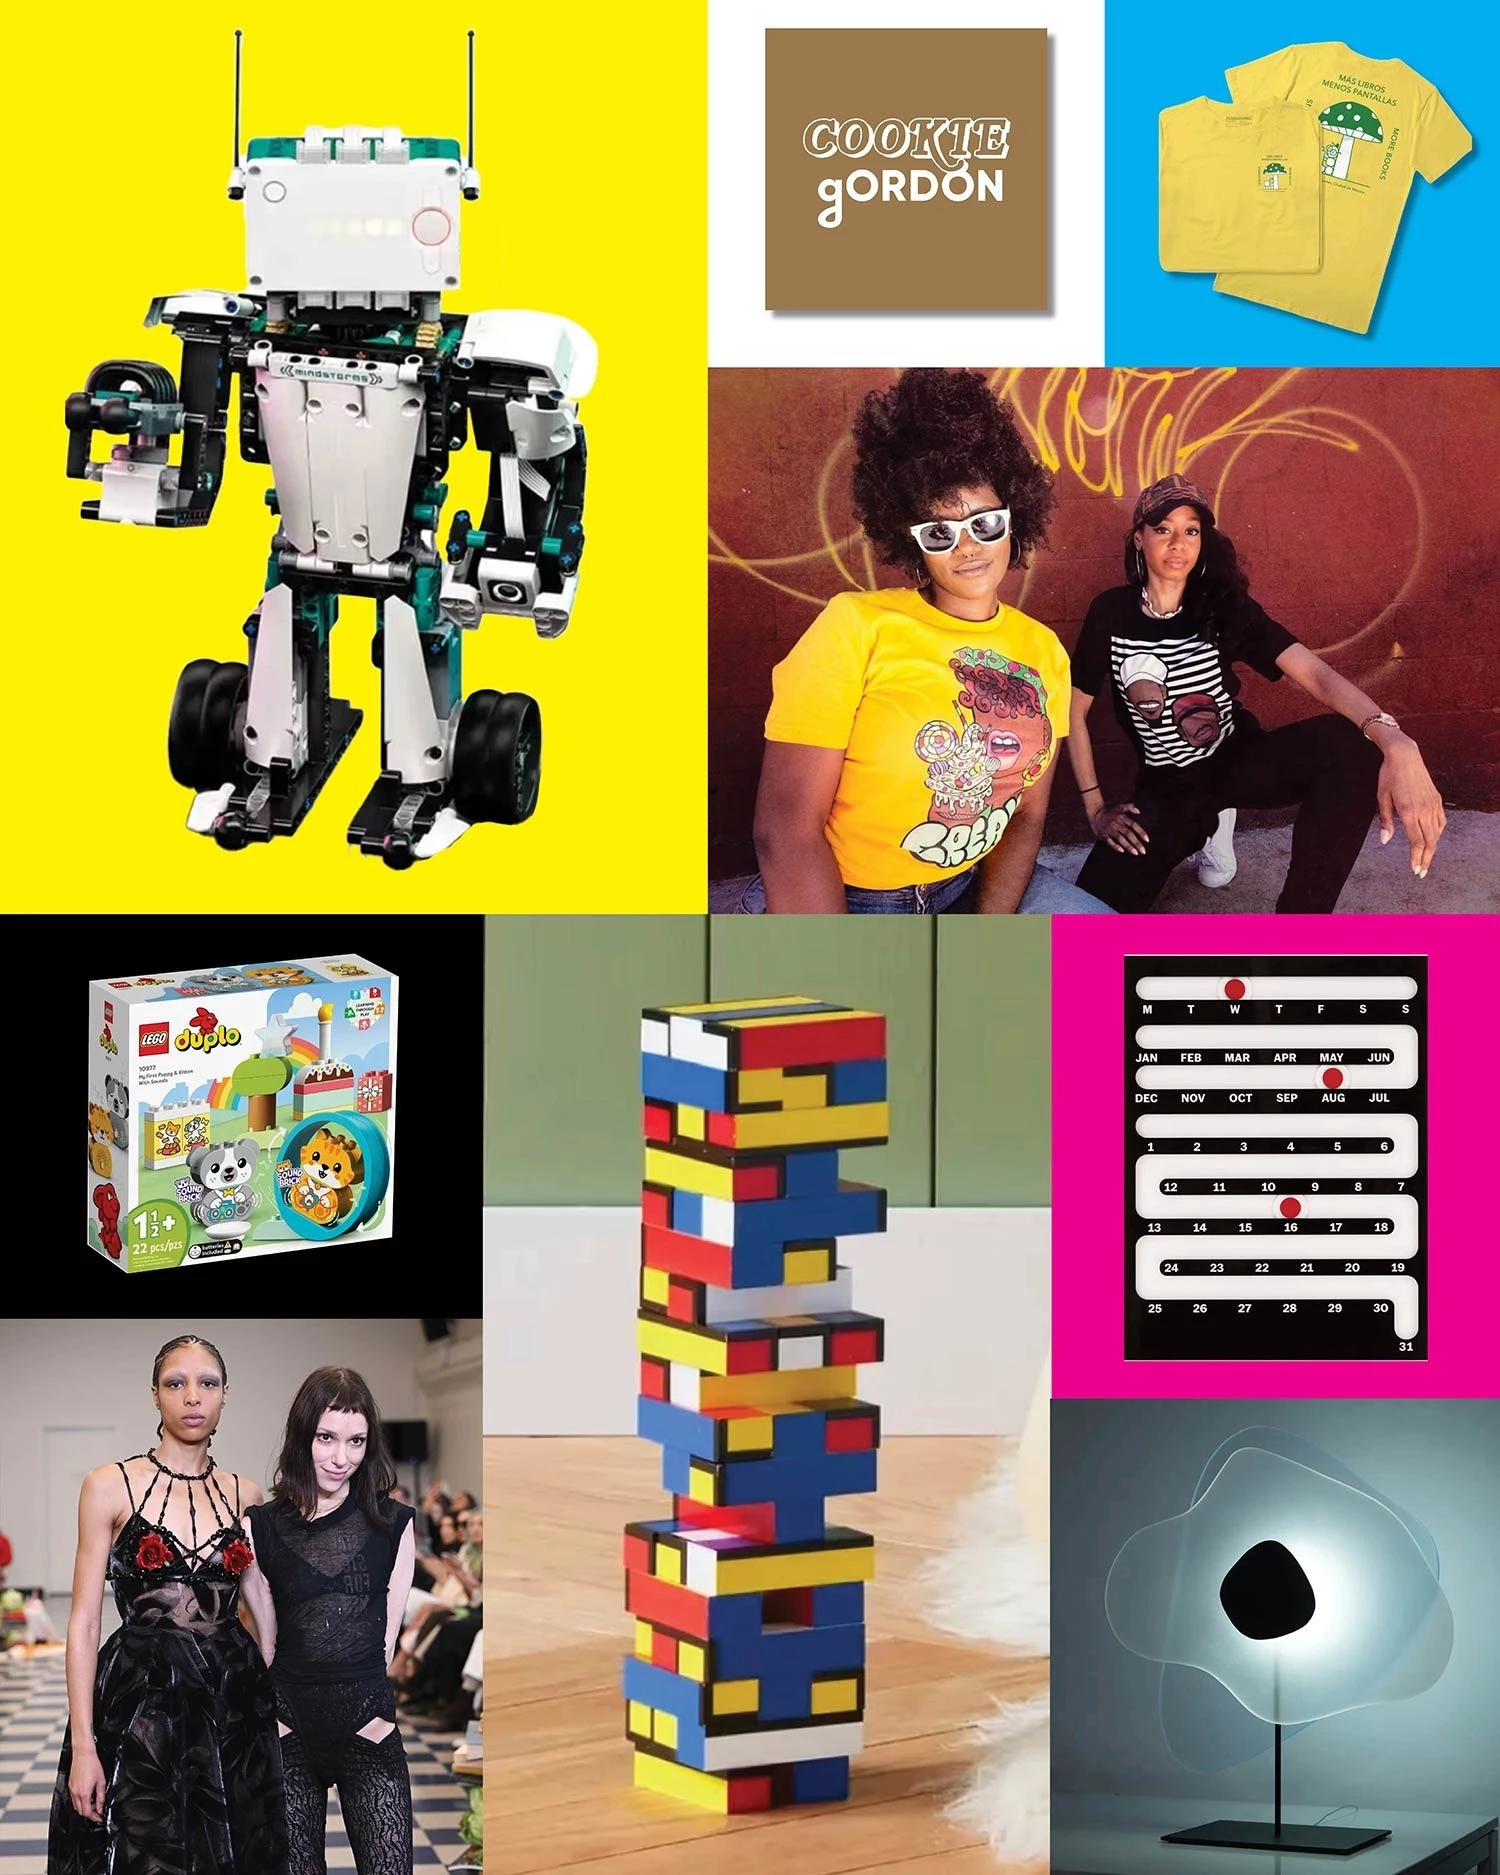 A collage of images of products from sva alumni, including games, fashion items, home decoration, and more.